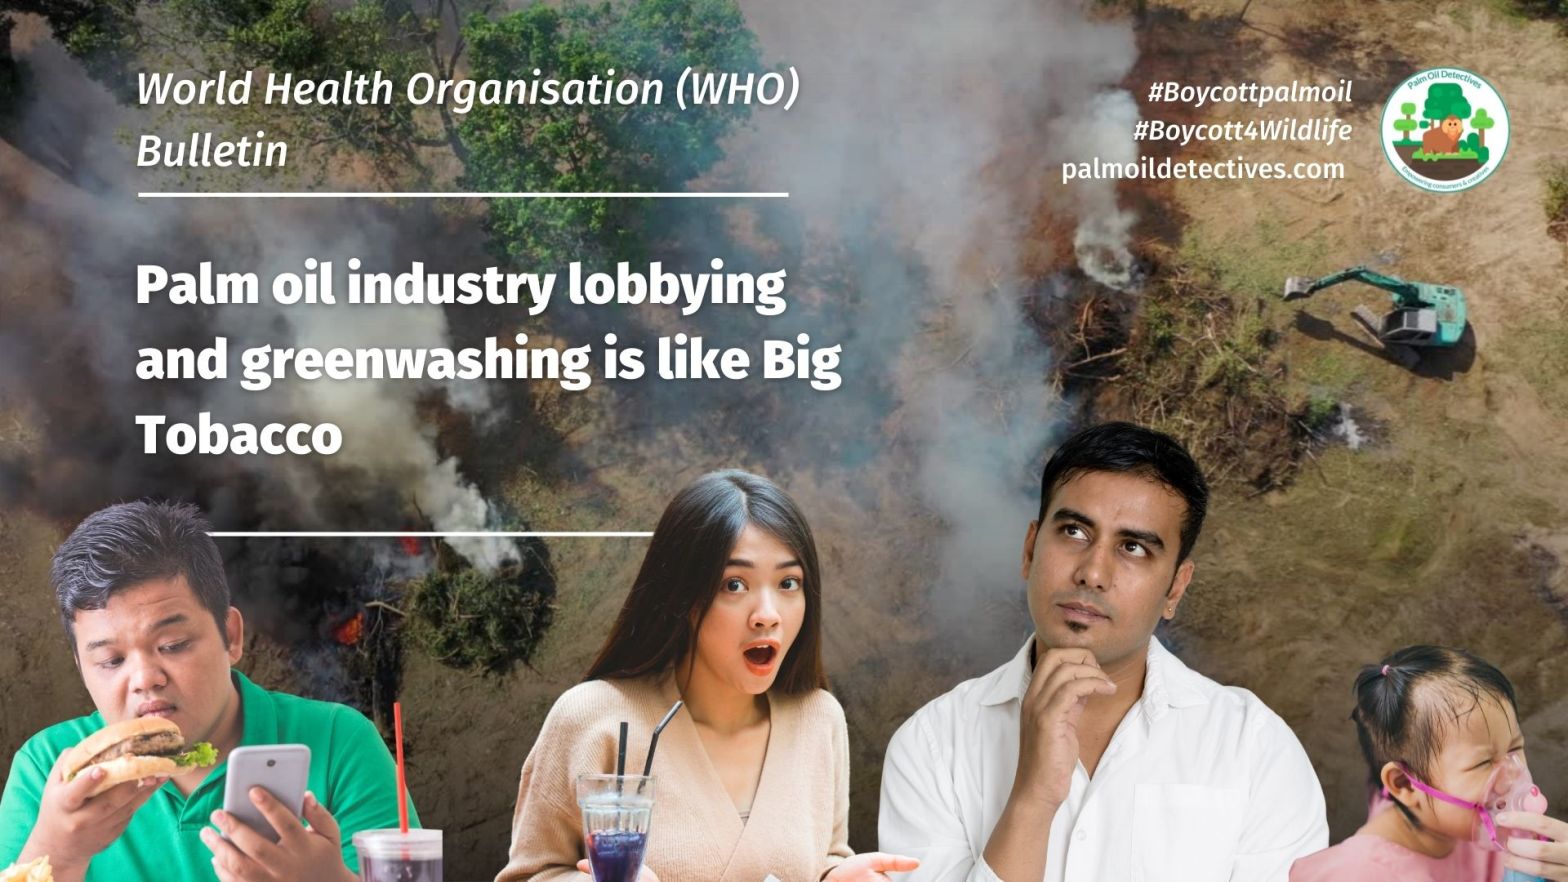 The World Health Organisation's Bulletin: Palm Oil Industry Lobbying and Greenwashing is Like Big Tobacco